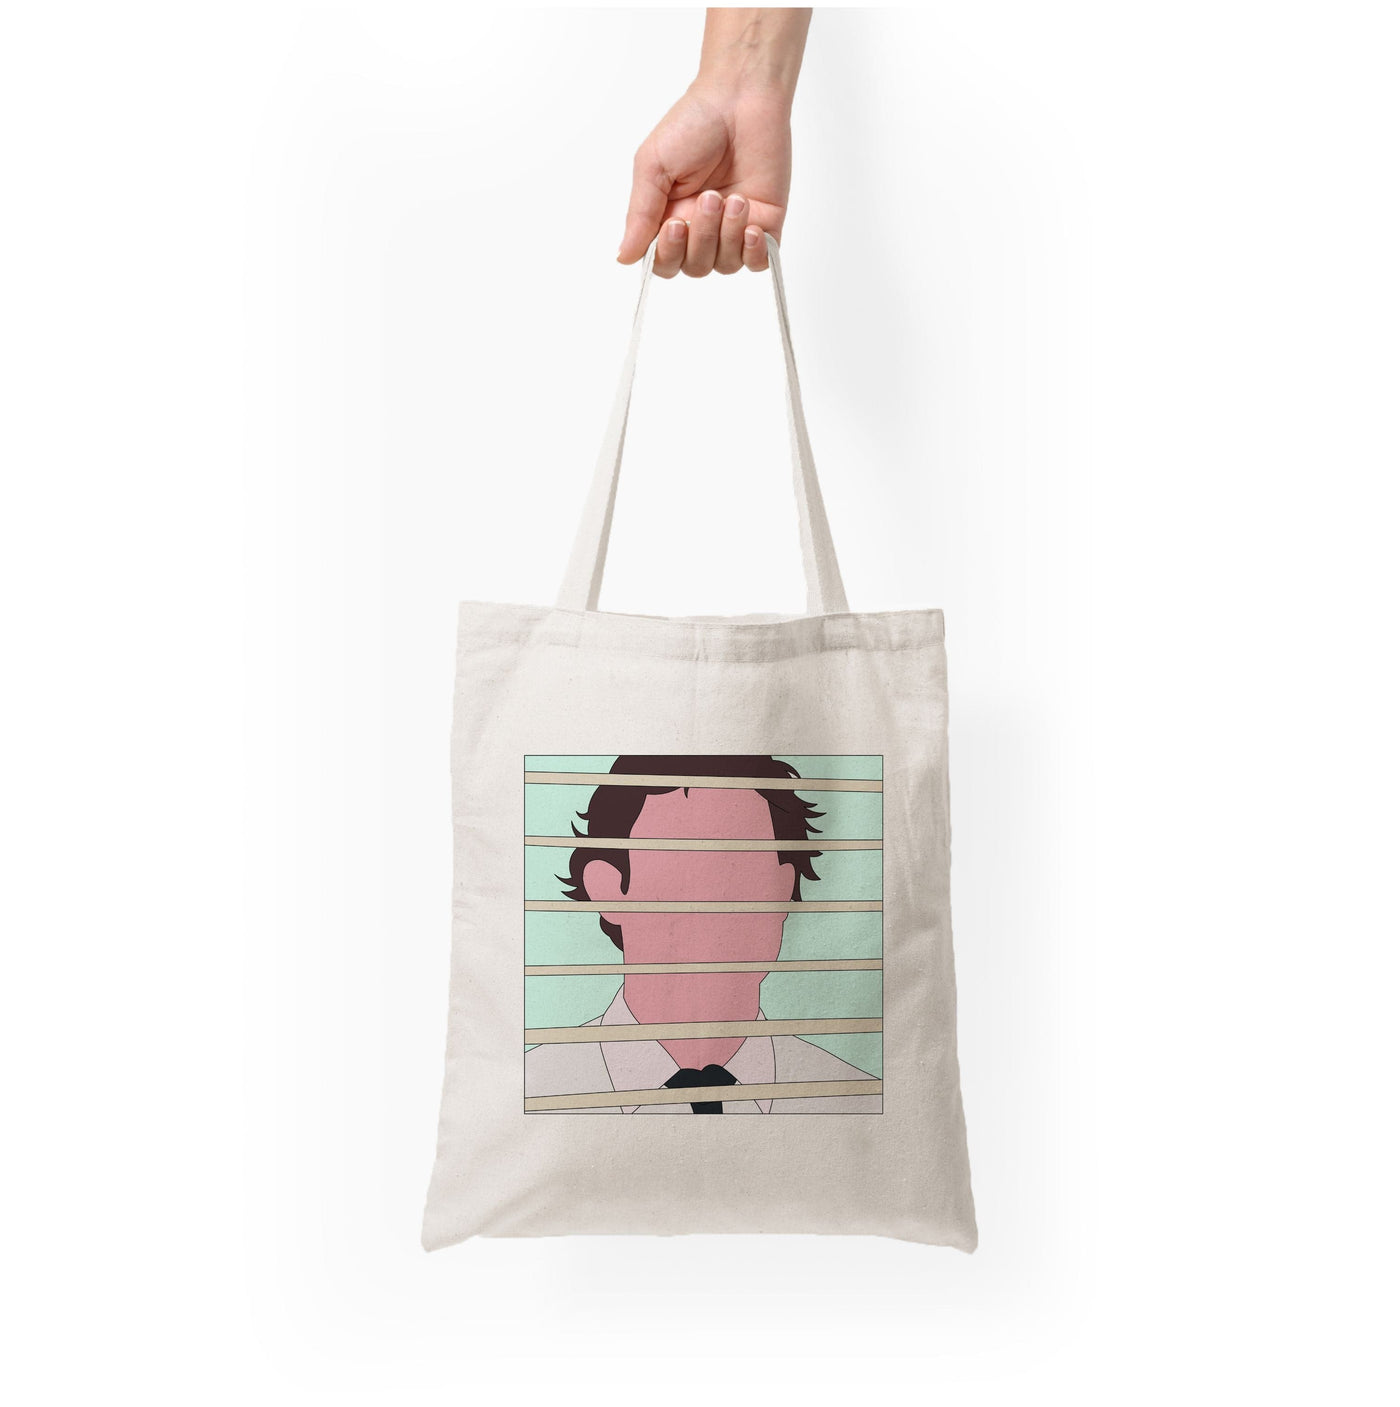 Jim Through The Blinds - The Office Tote Bag